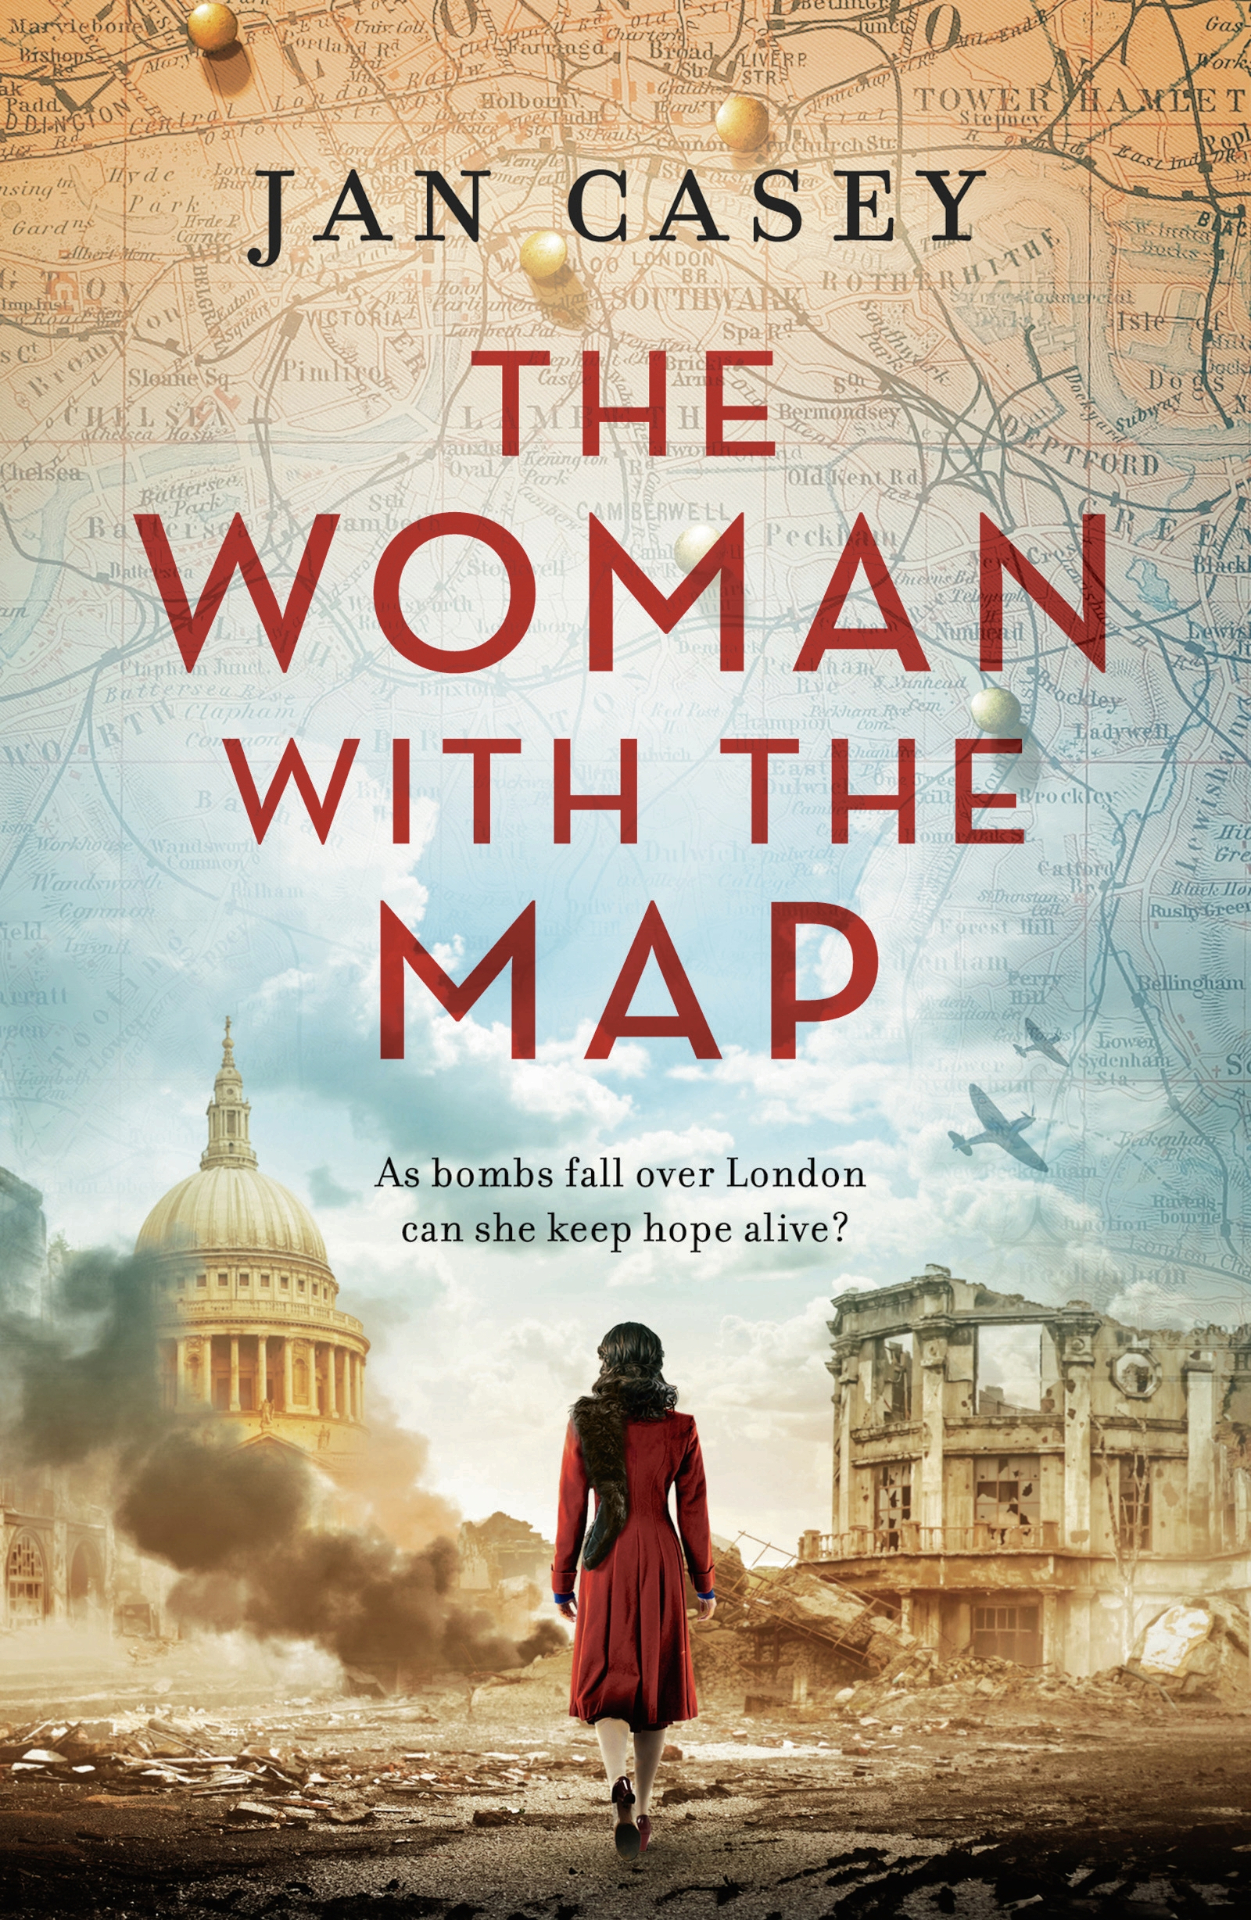 The Woman with the Map book cover